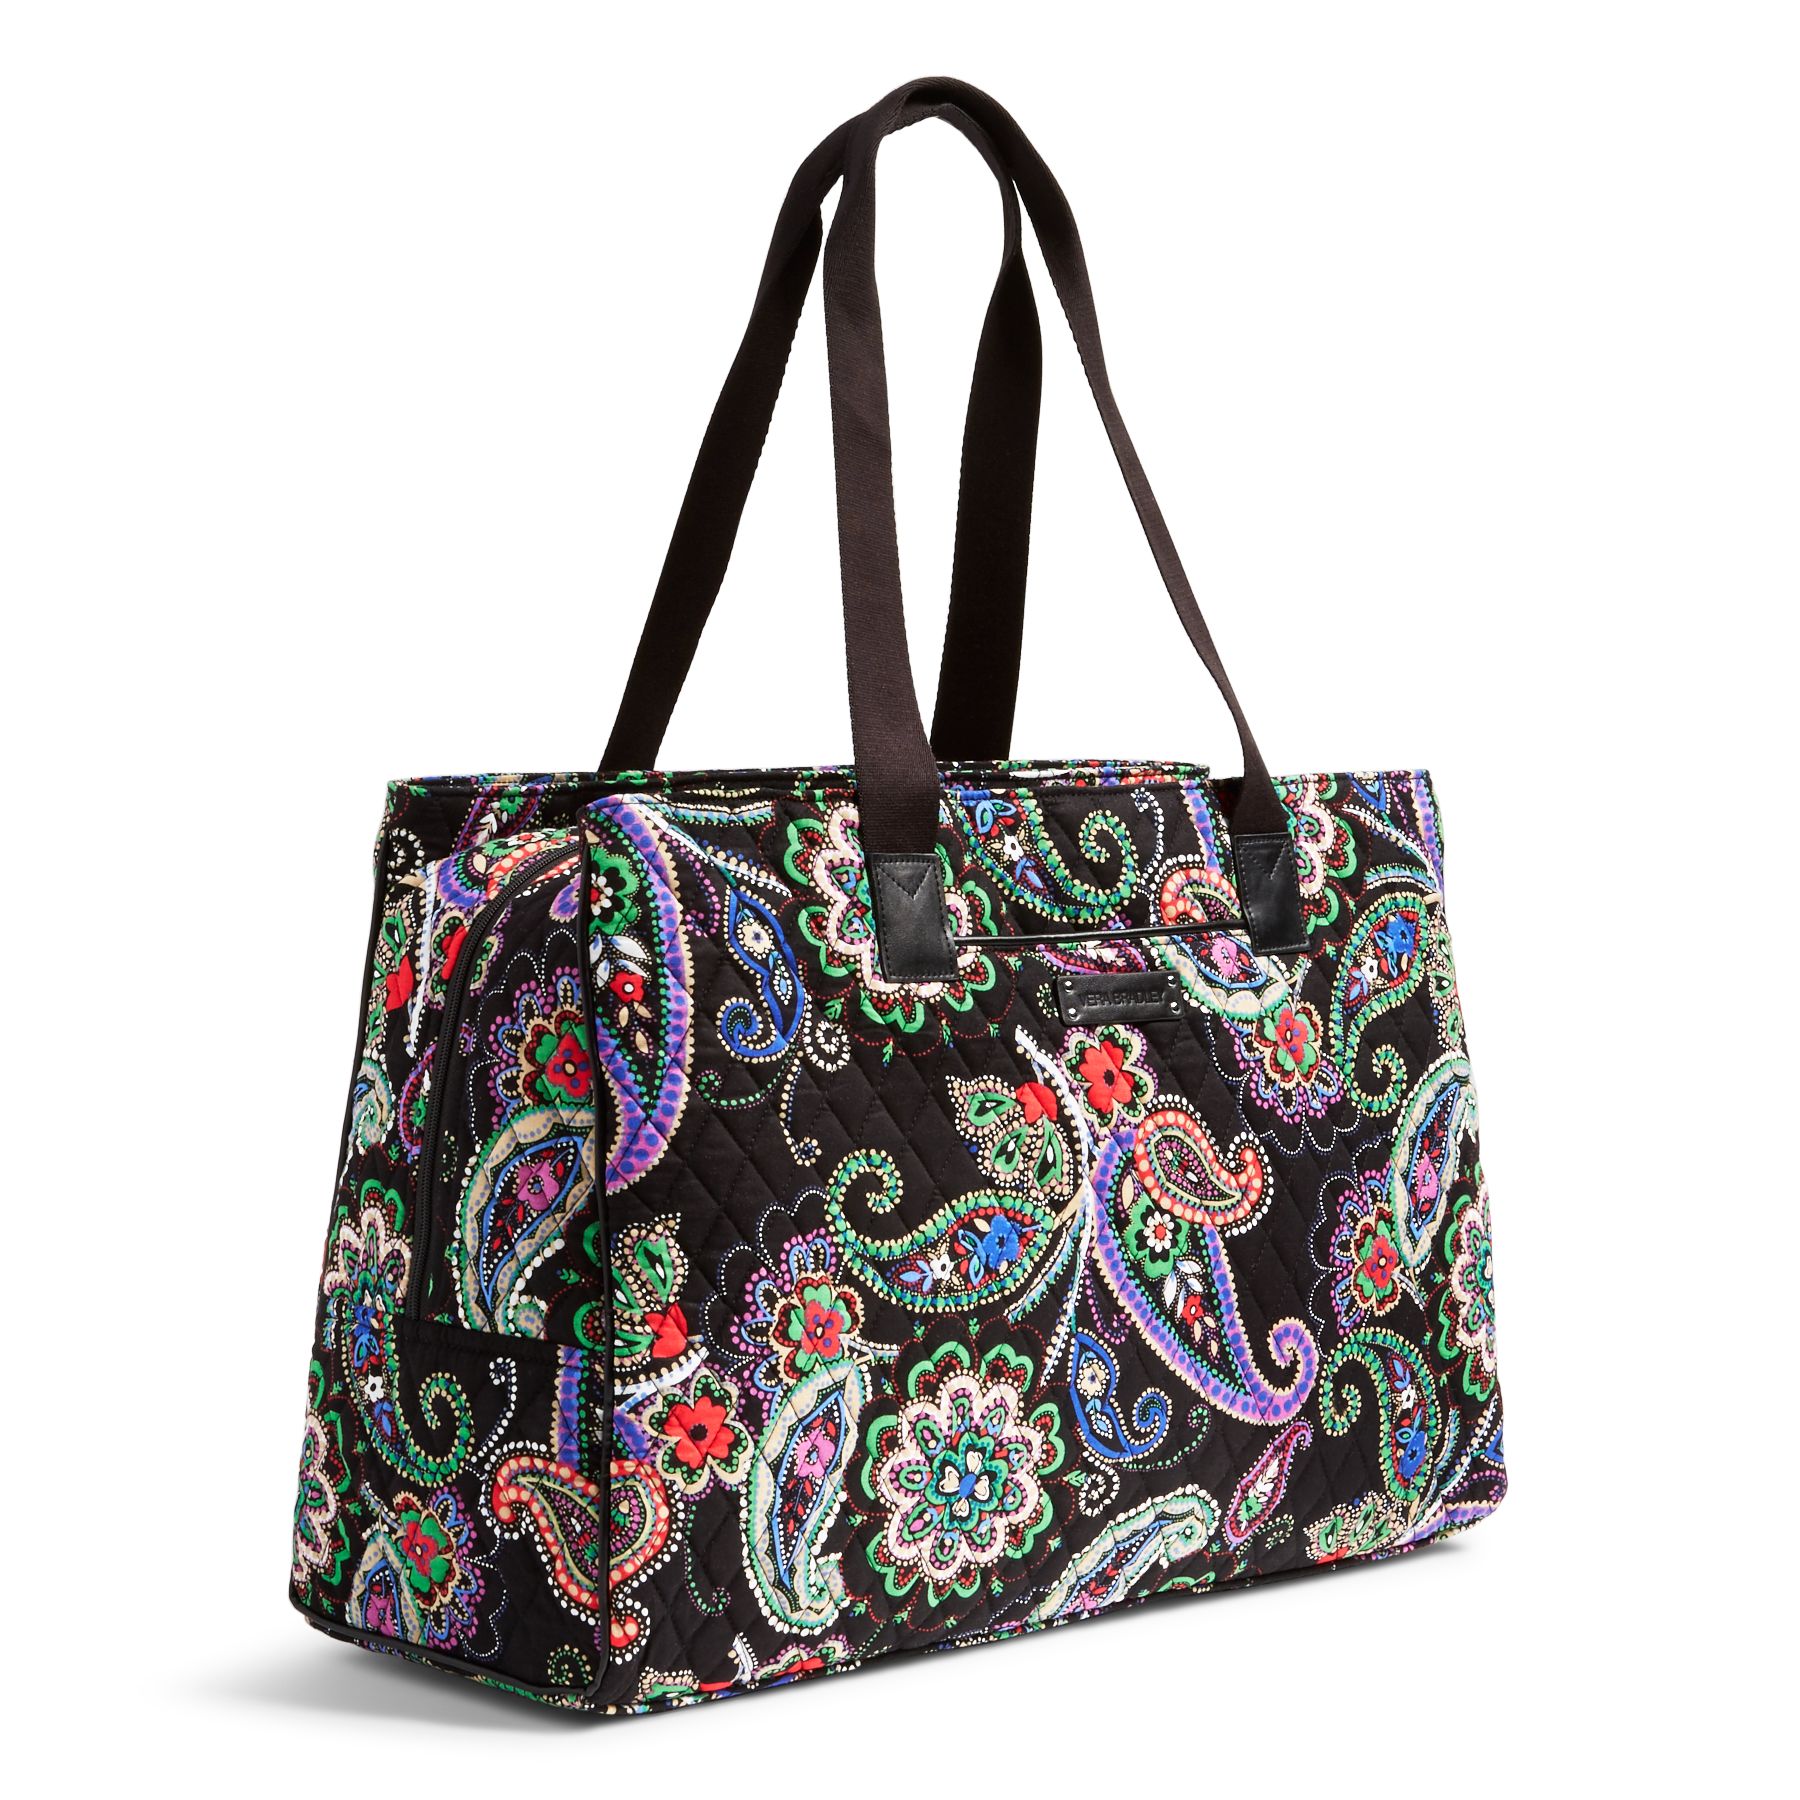 Vera Bradley Coupon Code With Travel Bags For Women